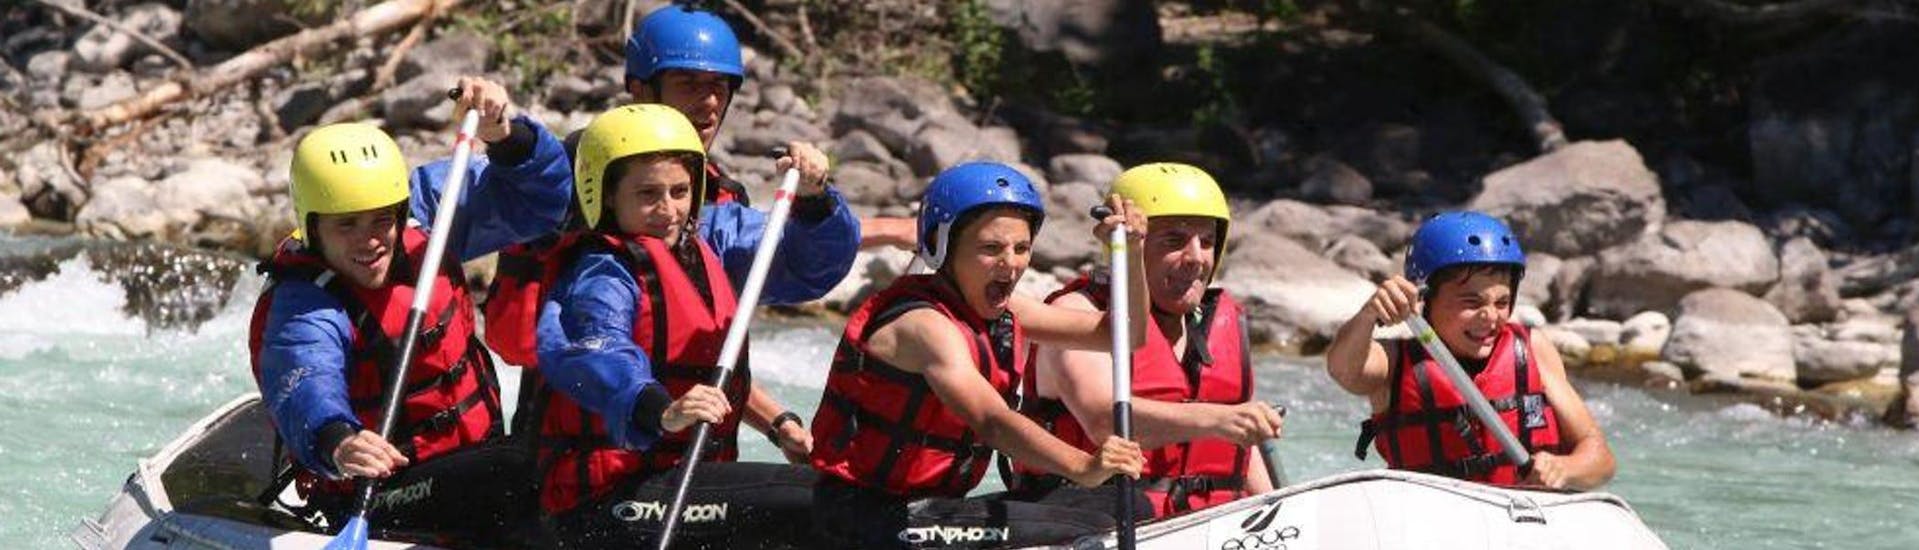 A family is having fun during the Rafting on Durance River for Group - Discovery activity with Ecrins Eaux Vives.